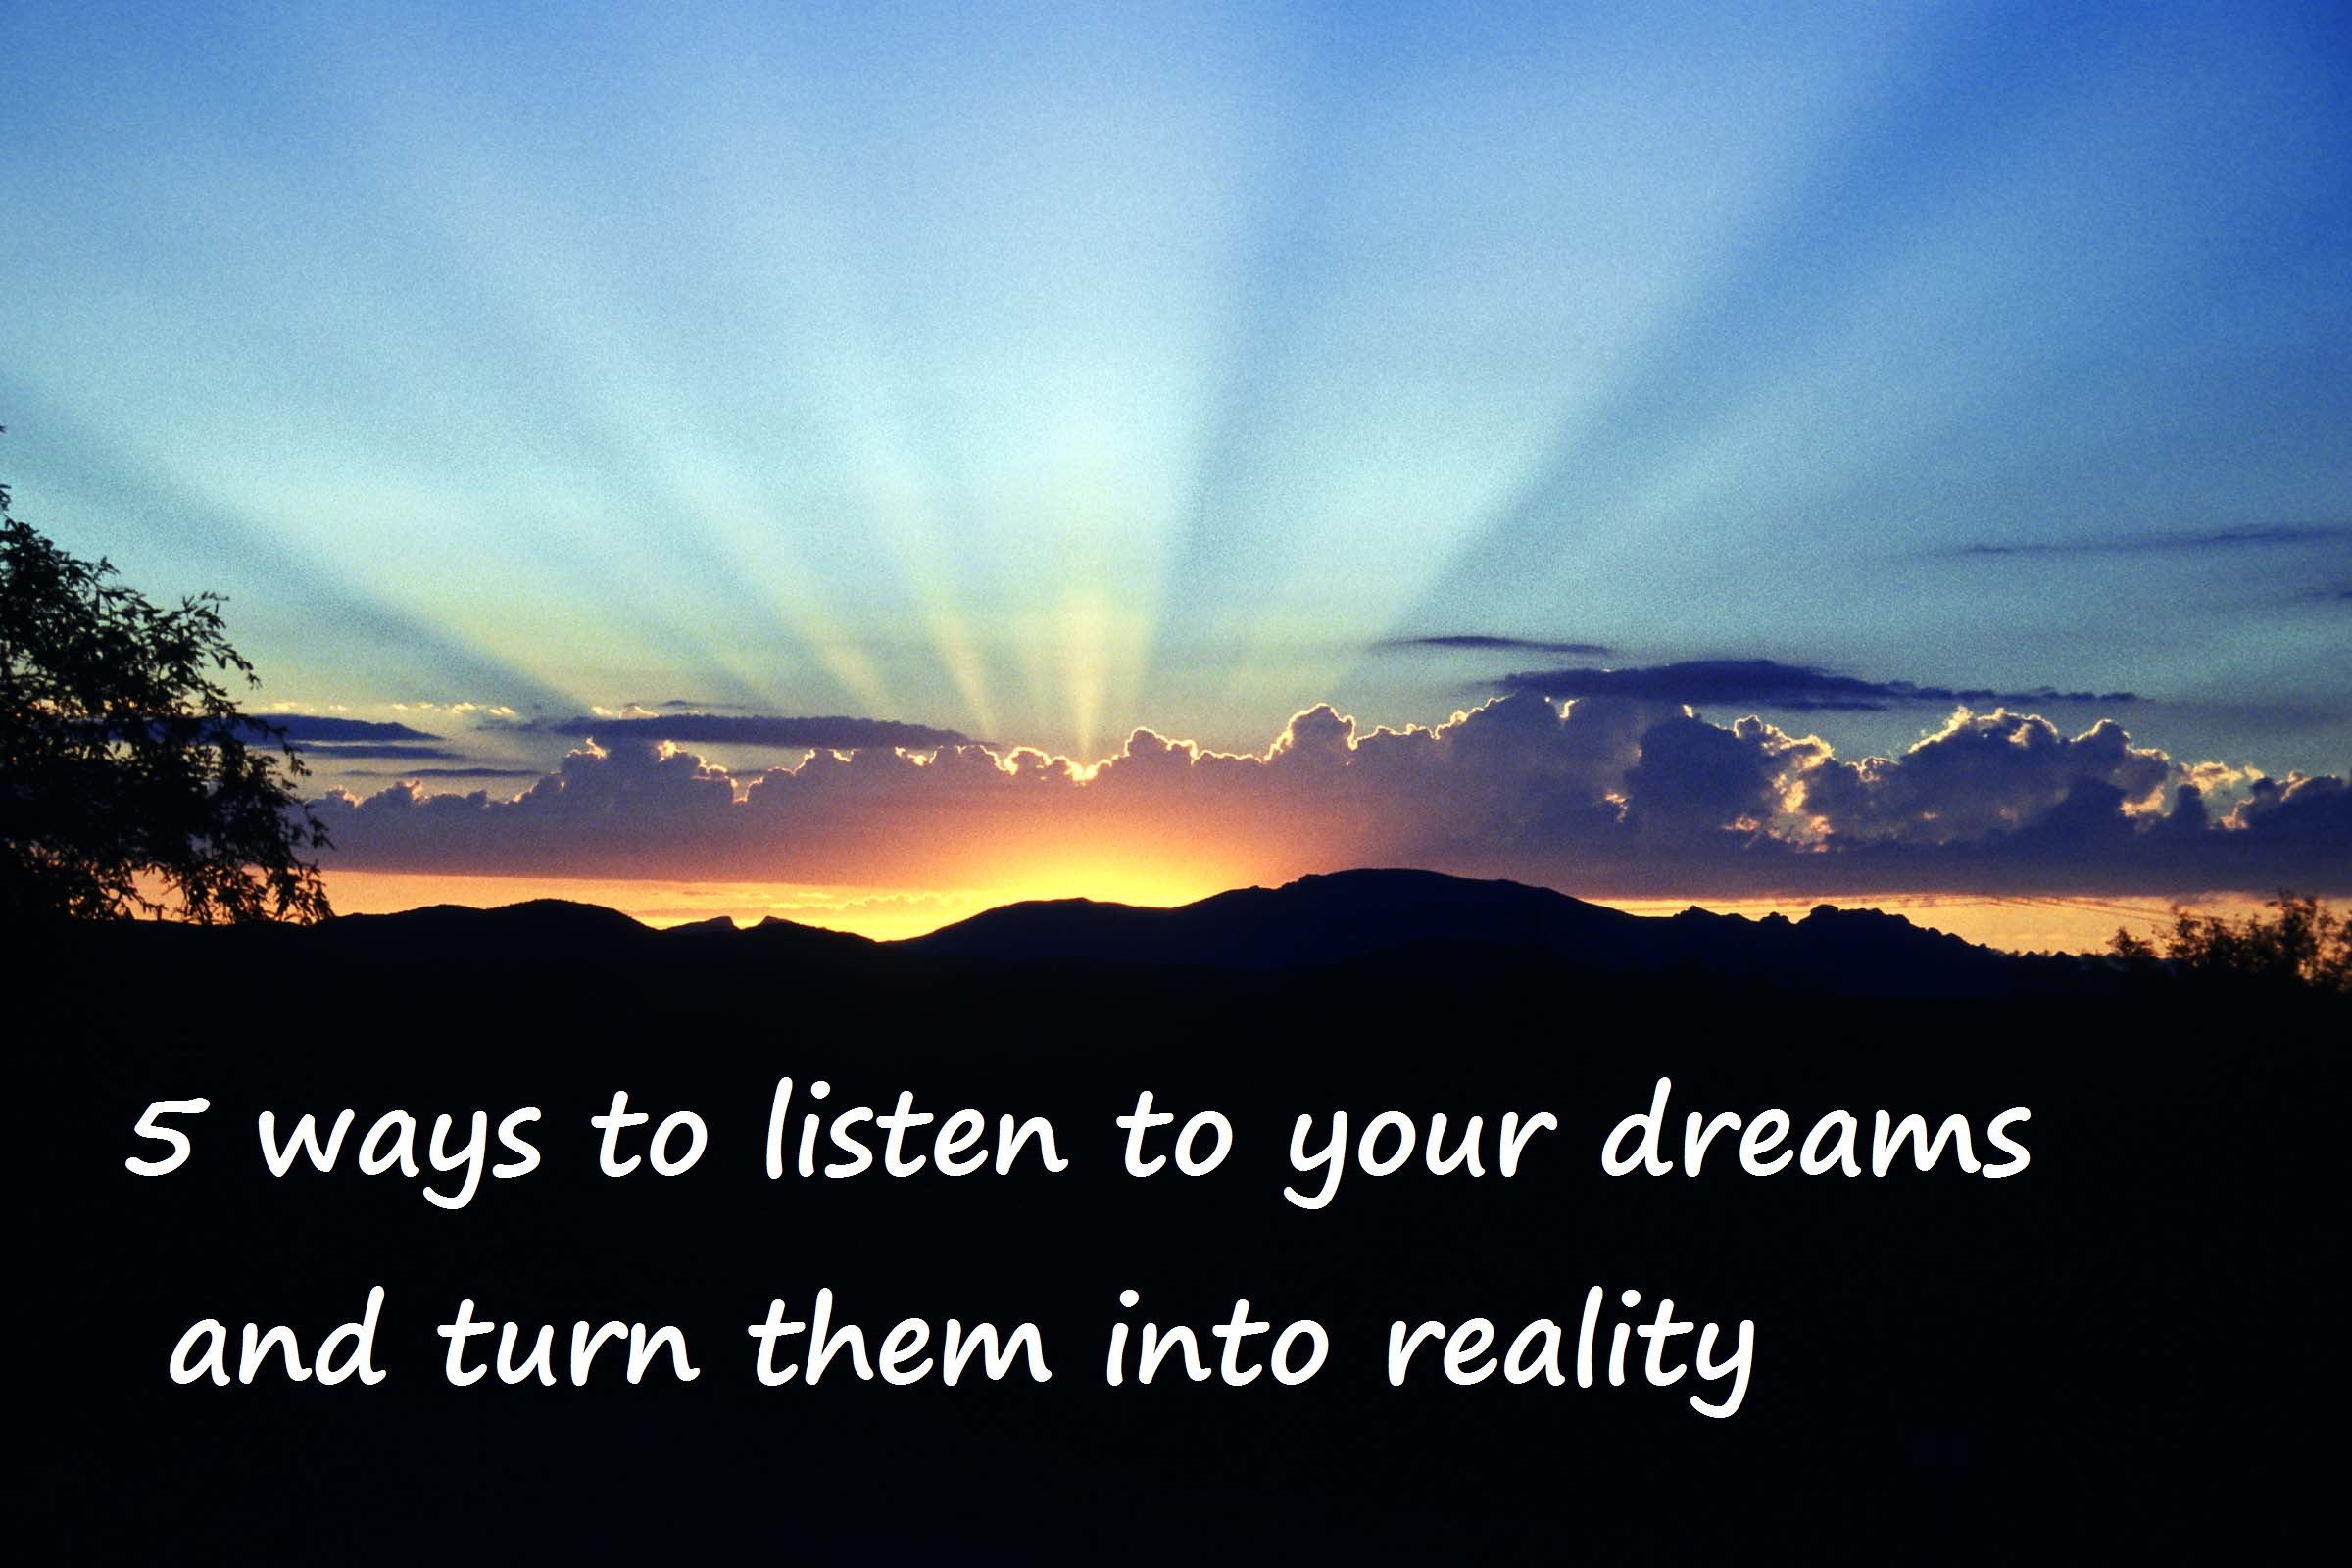 Law of attraction exercises: sleep and dreams